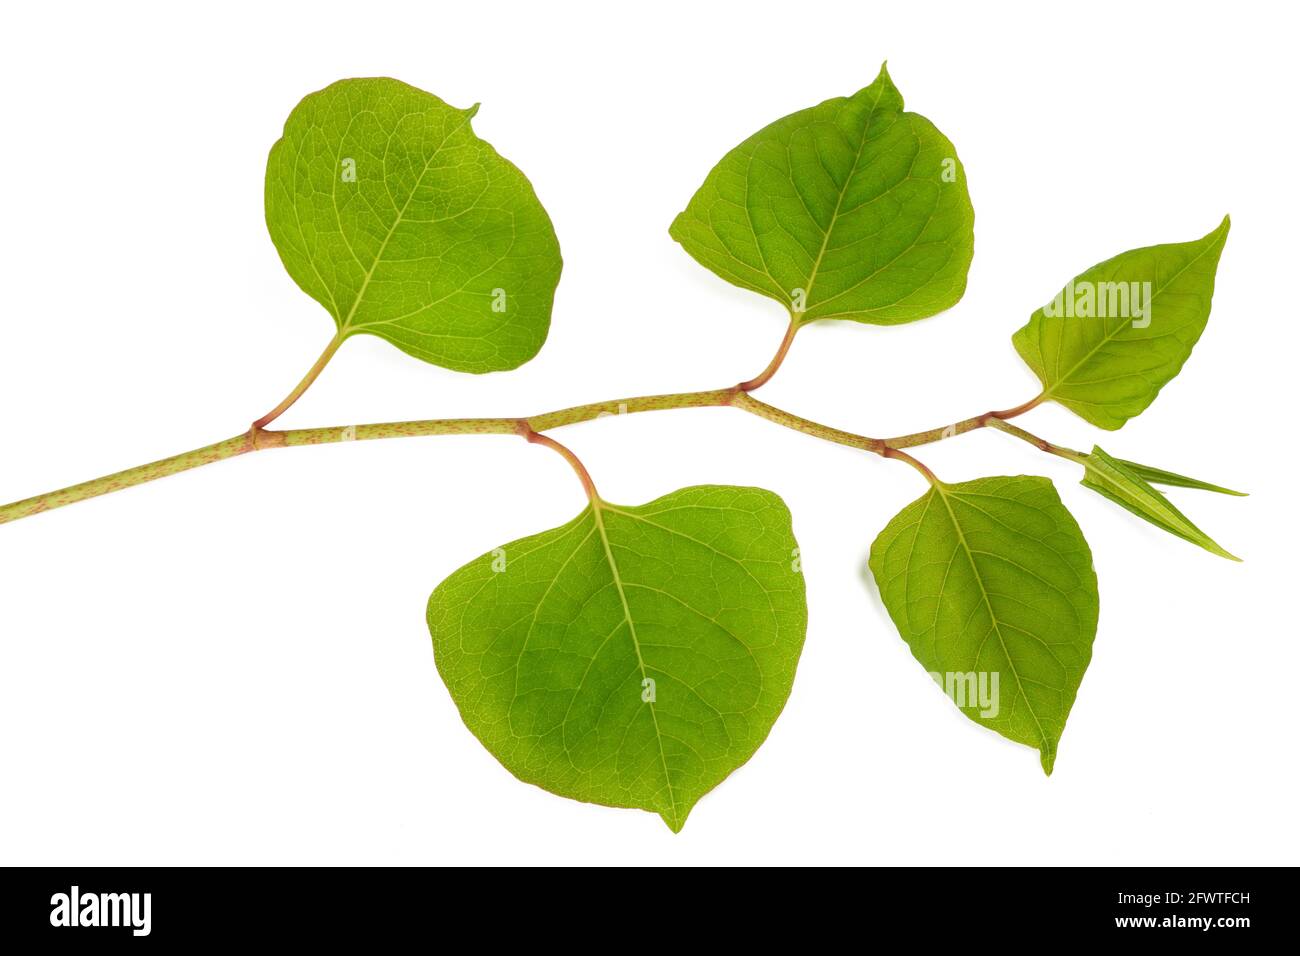 Asian knotweed branch isolated on white background Stock Photo